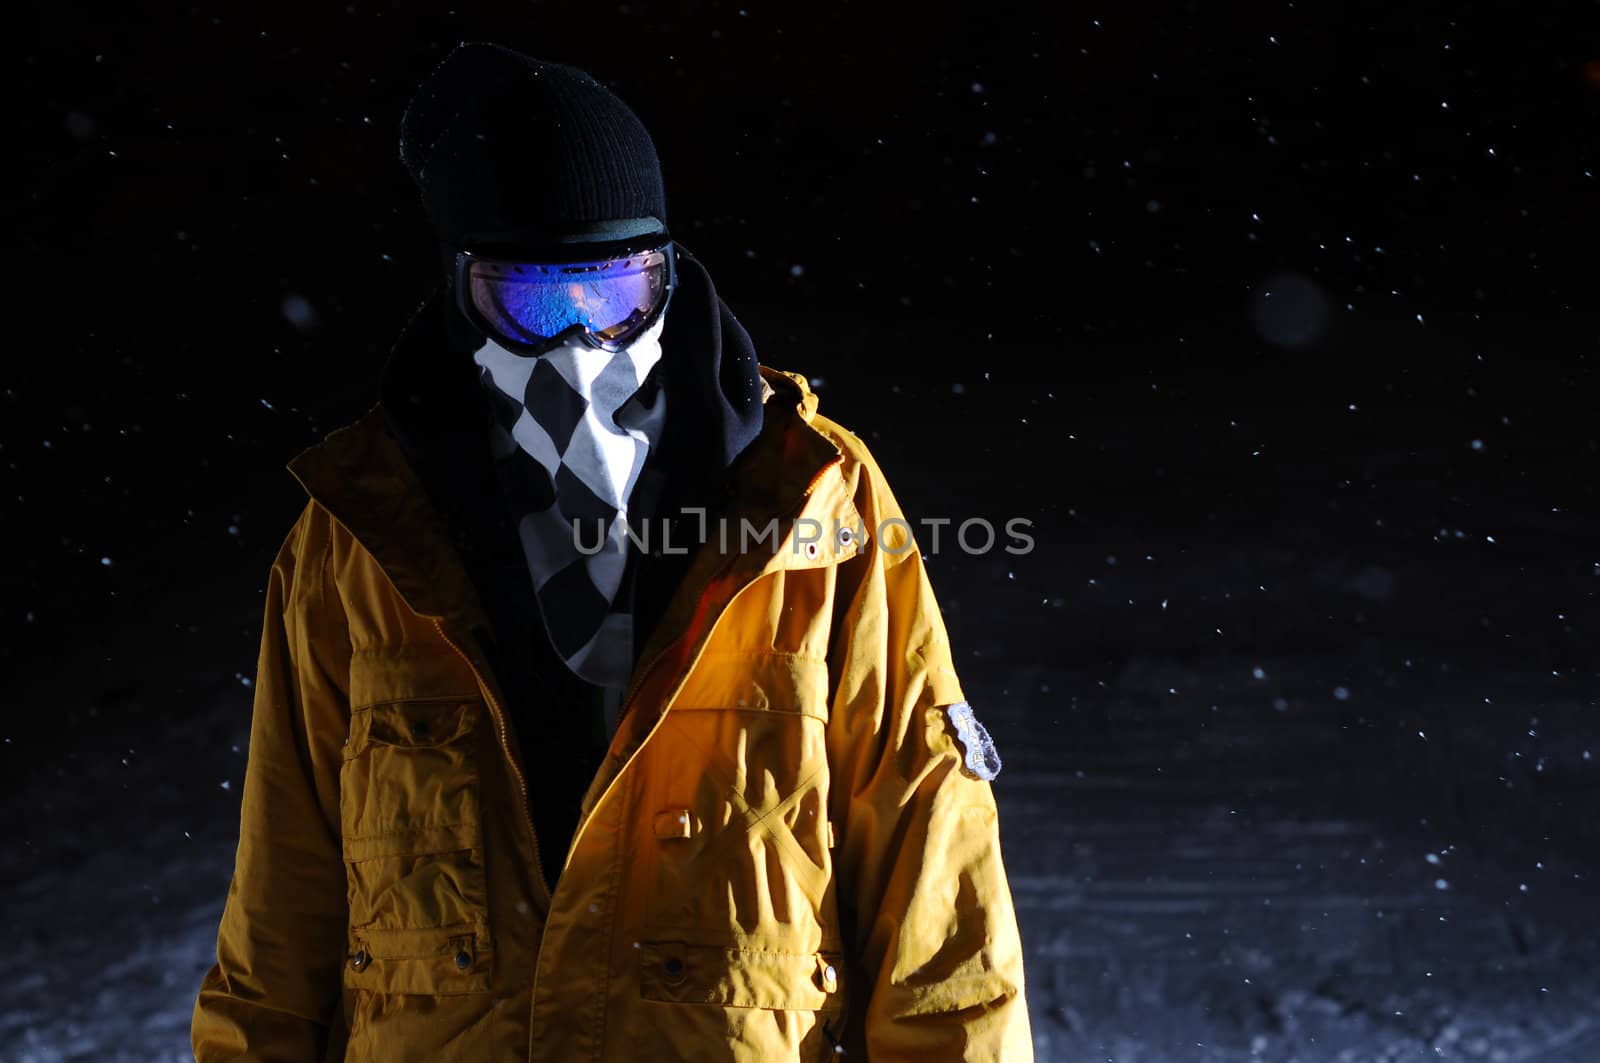 Portrait of a snowboarder standing at night by gravityimaging1